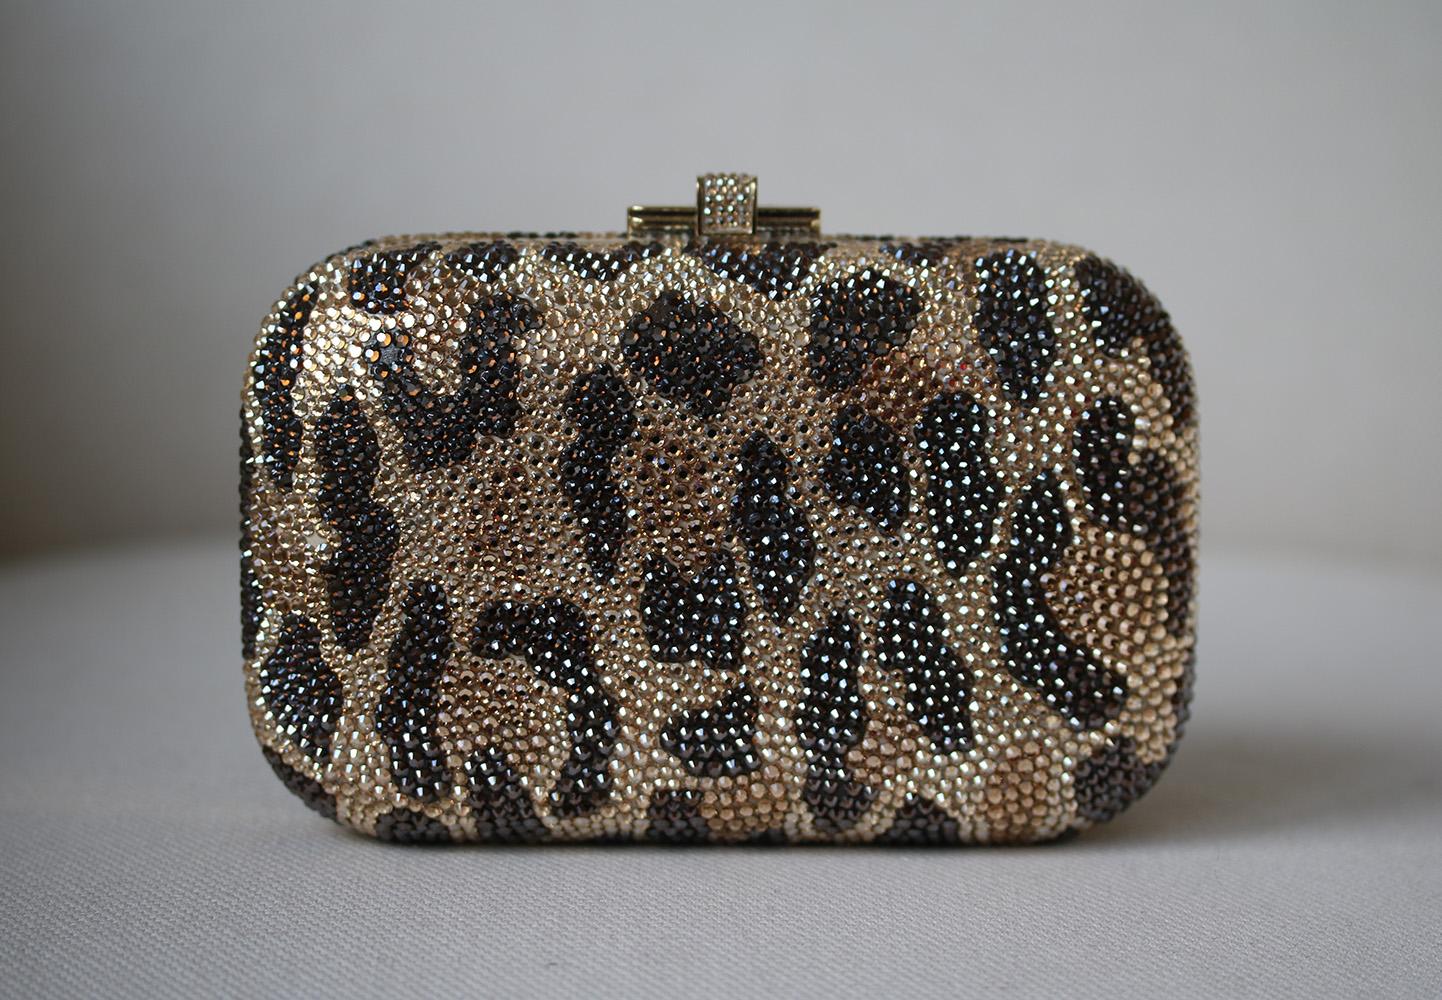 Leopard-print hard box clutch with hand-placed fine crystal embellishment. Judith Leiber clutch has a gold frame and removable chain-link handle that can be hidden inside the bag, a push-clasp at top and is fully lined in gold leather.

Dimensions: